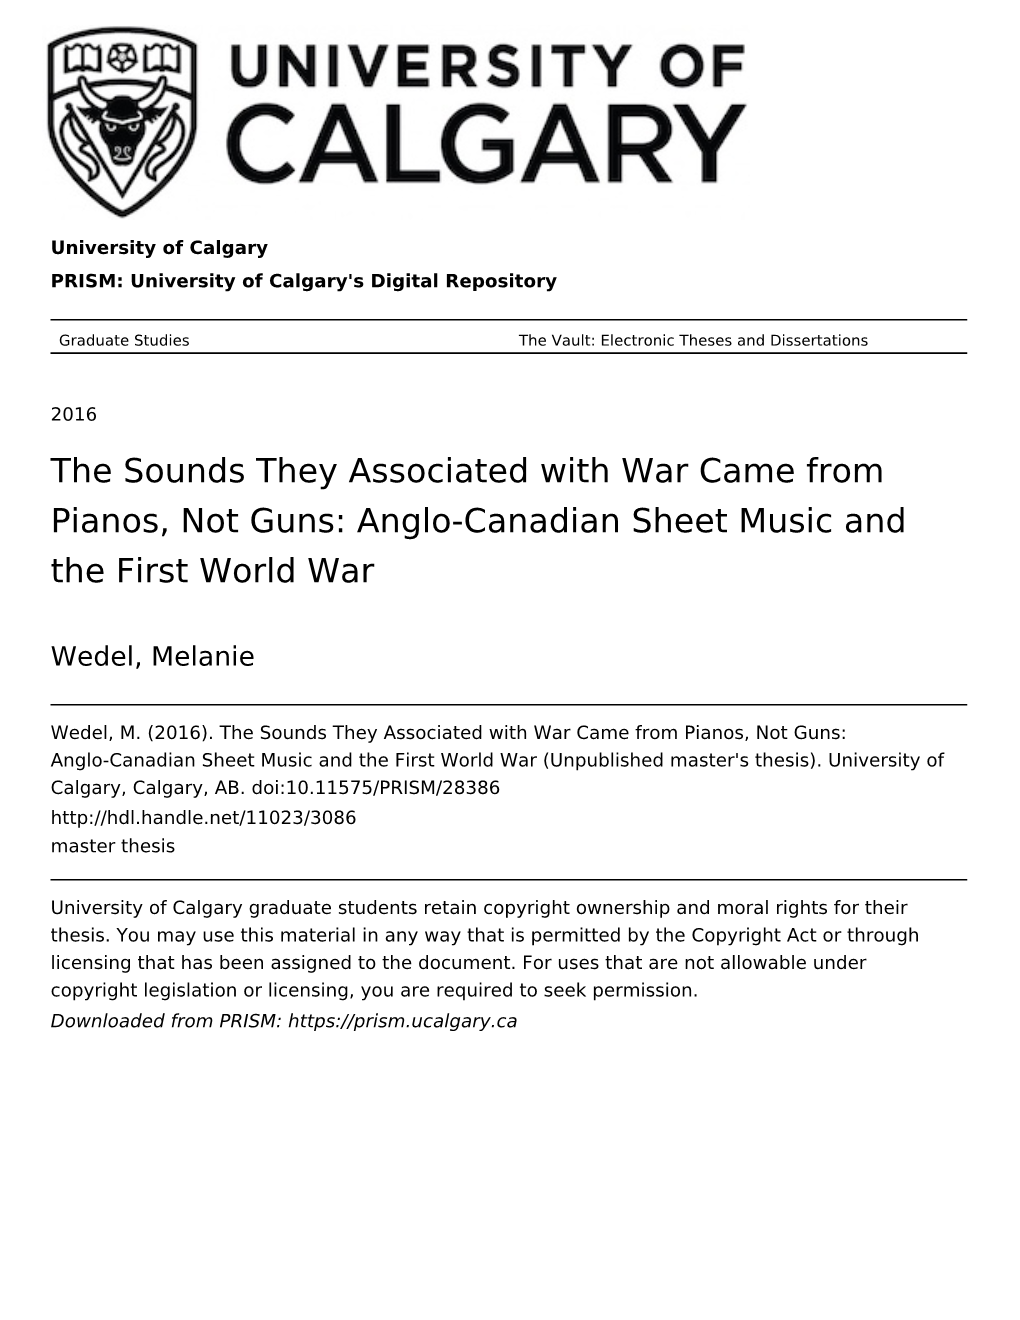 Anglo-Canadian Sheet Music and the First World War